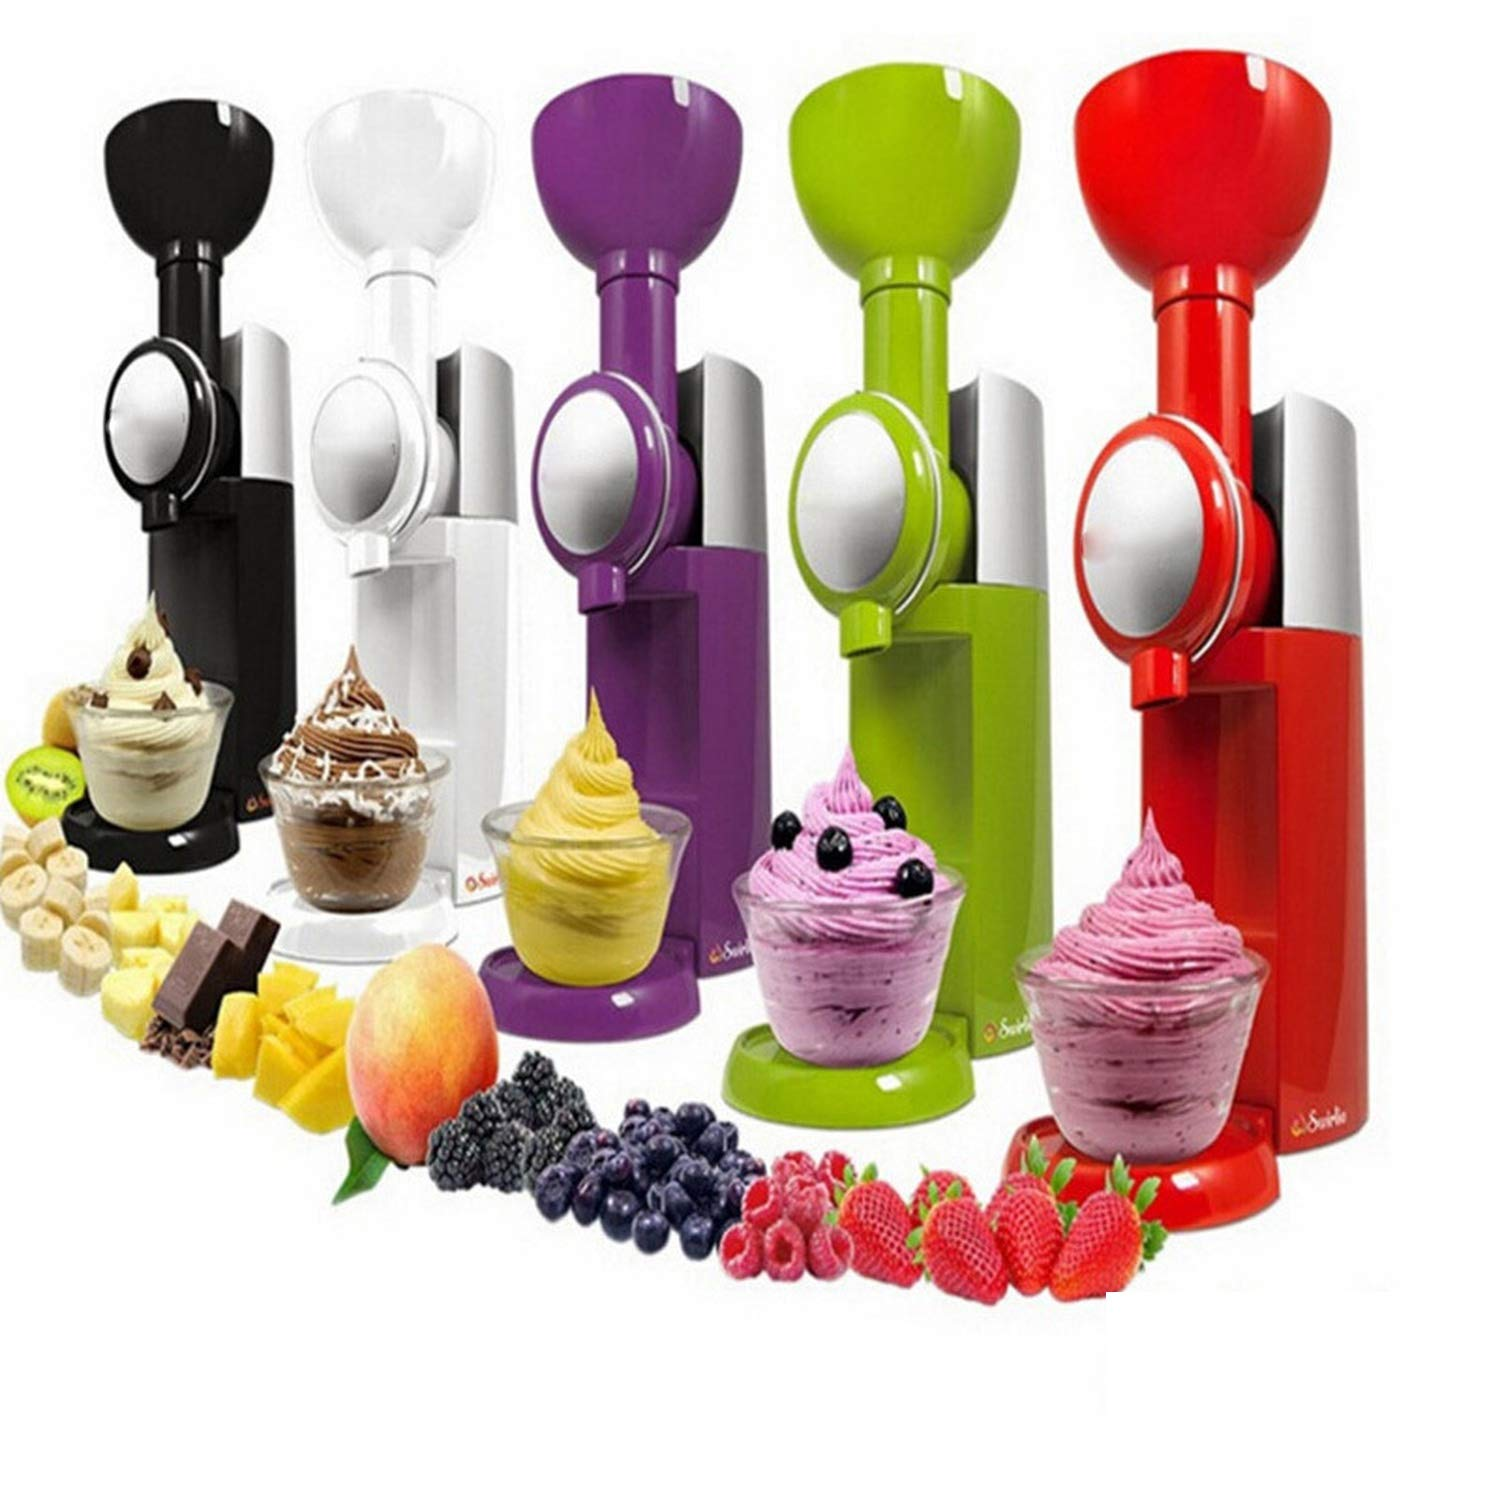 Vegetable Cutter And Other Storage Products For You